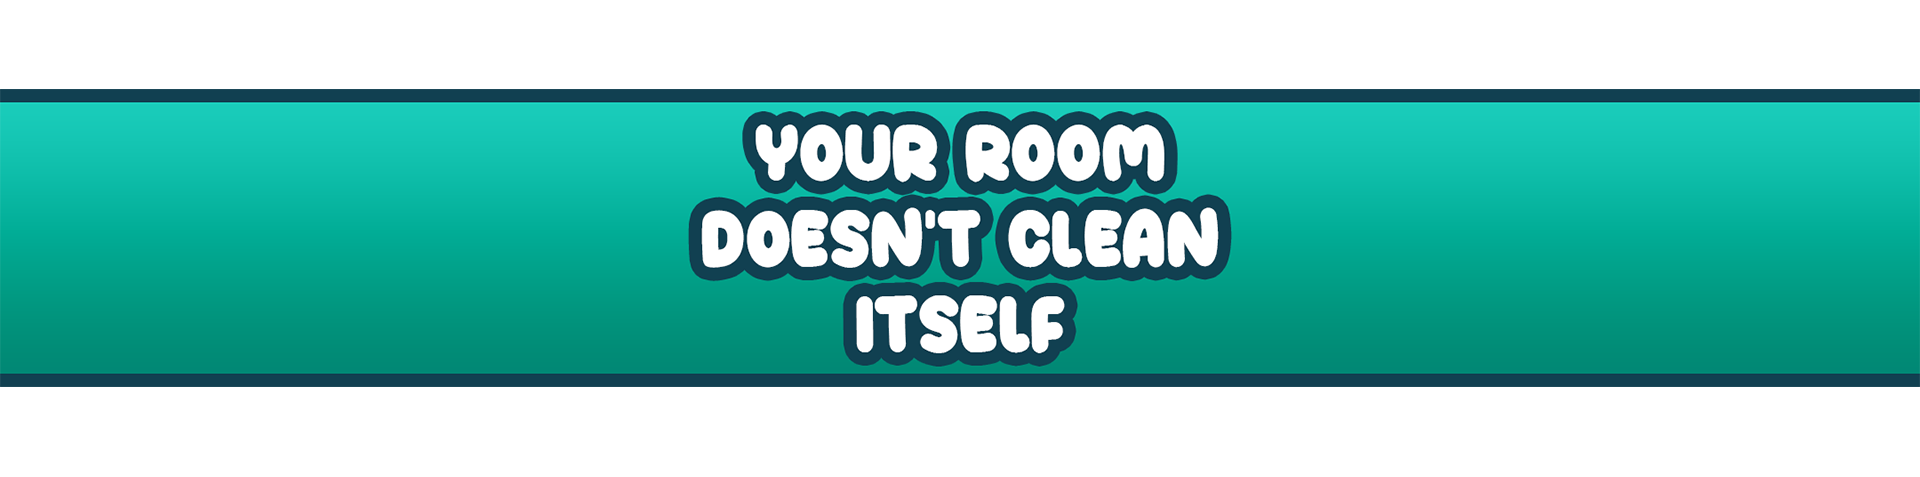 Your Room Doesn't Clean Itself